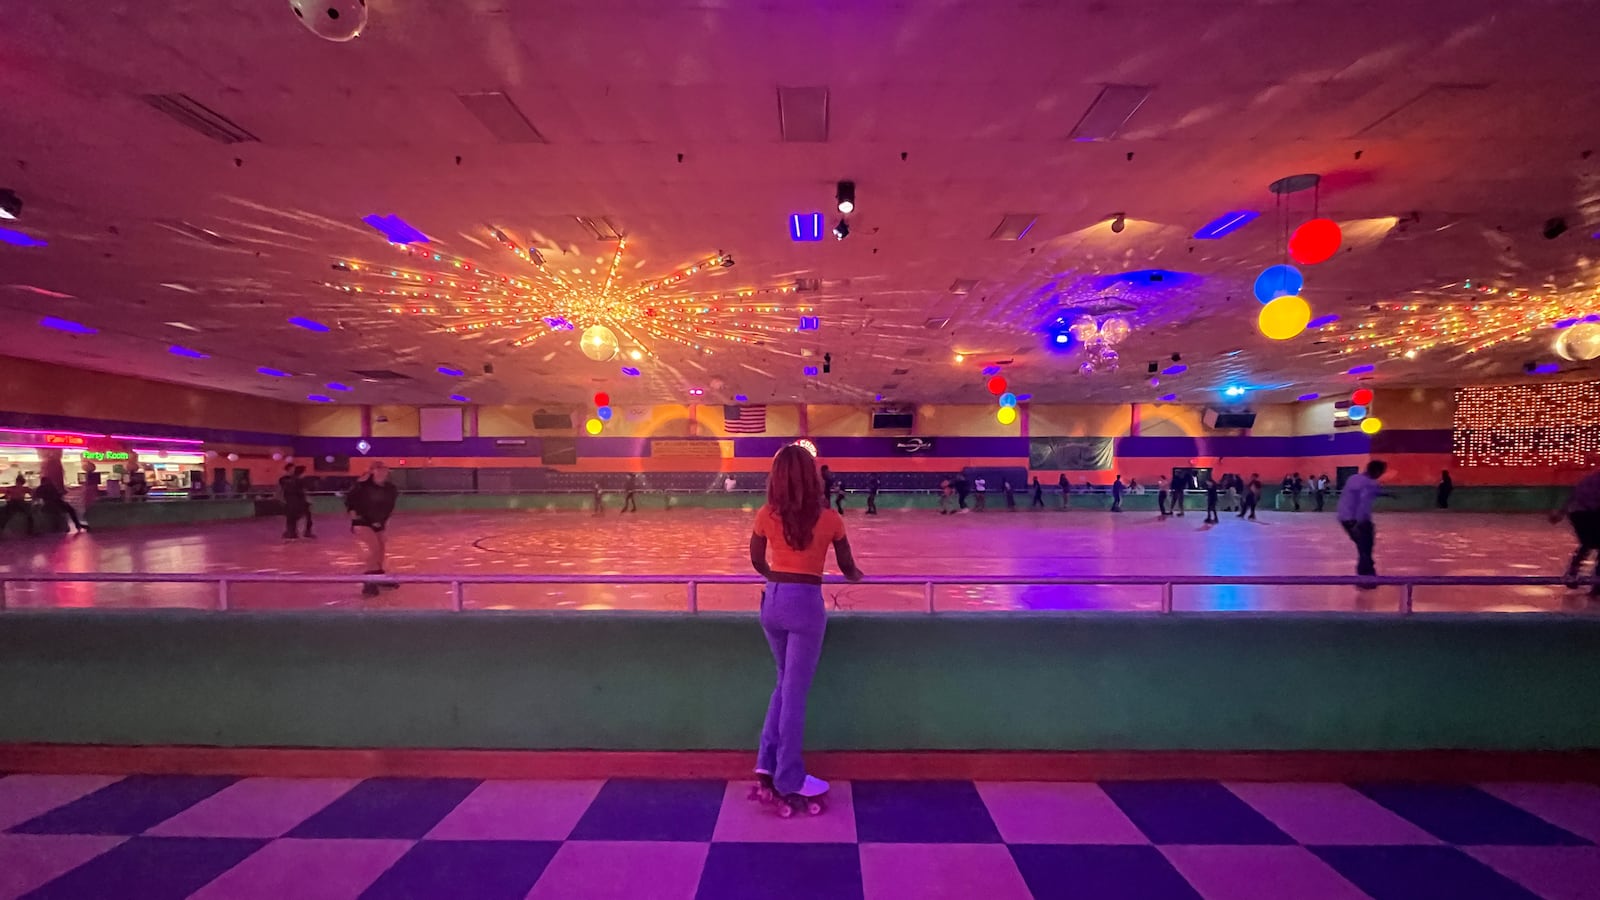 A high school girl wearing roller skates stands next to a railing on a checkered floor next to a roller rink with disco balls and lots of different color lights.